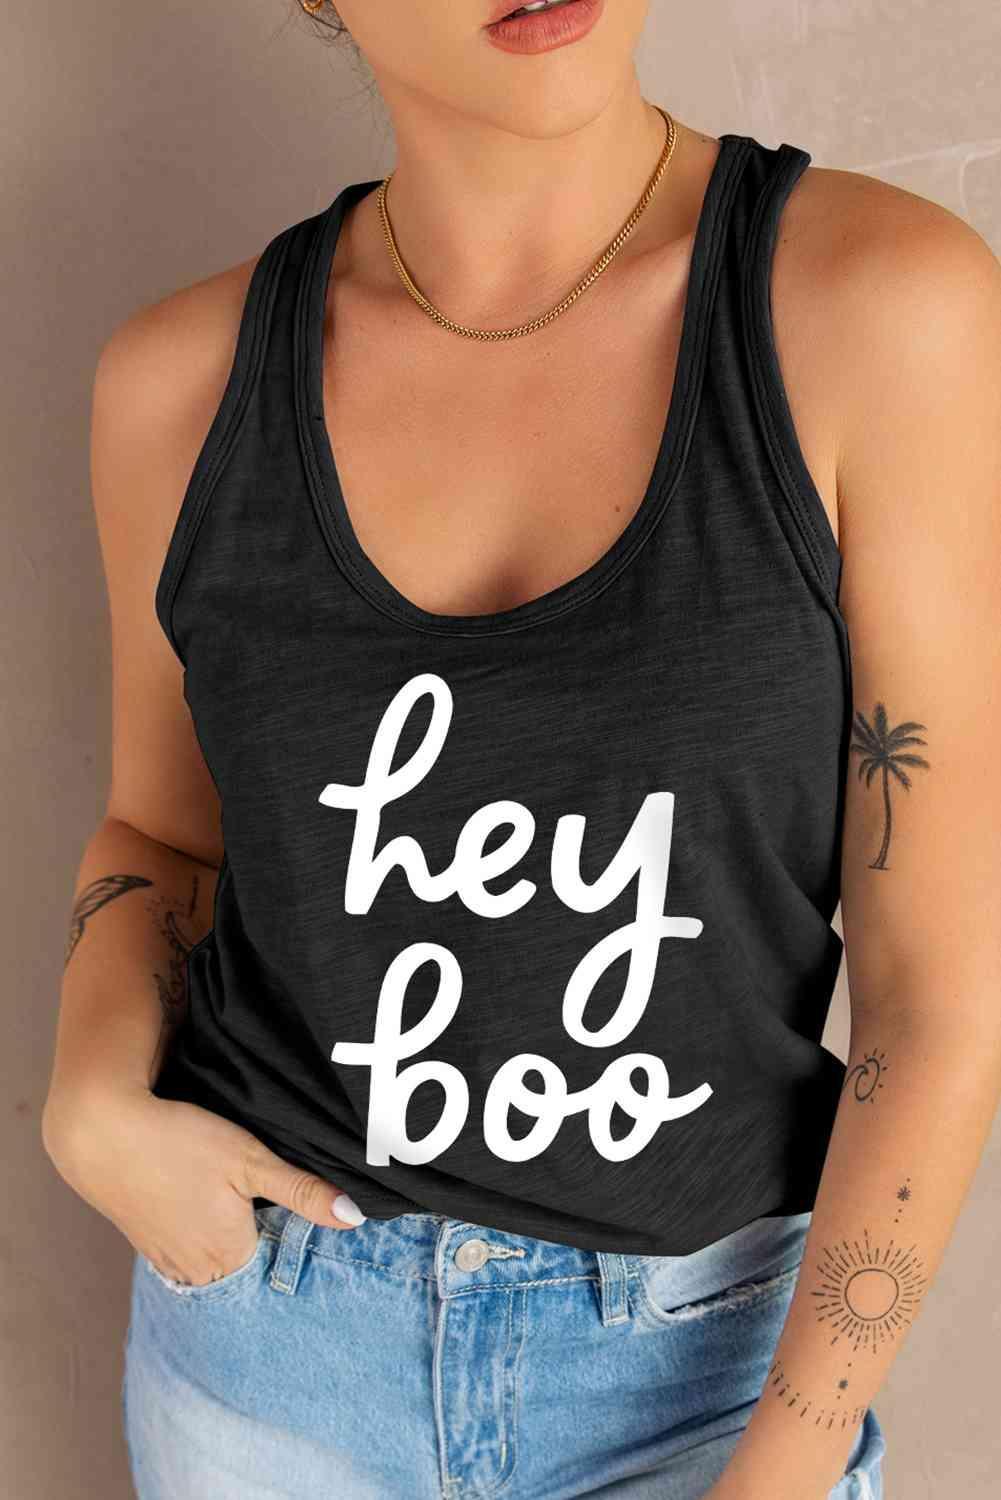 a woman wearing a black tank top that says hey boo